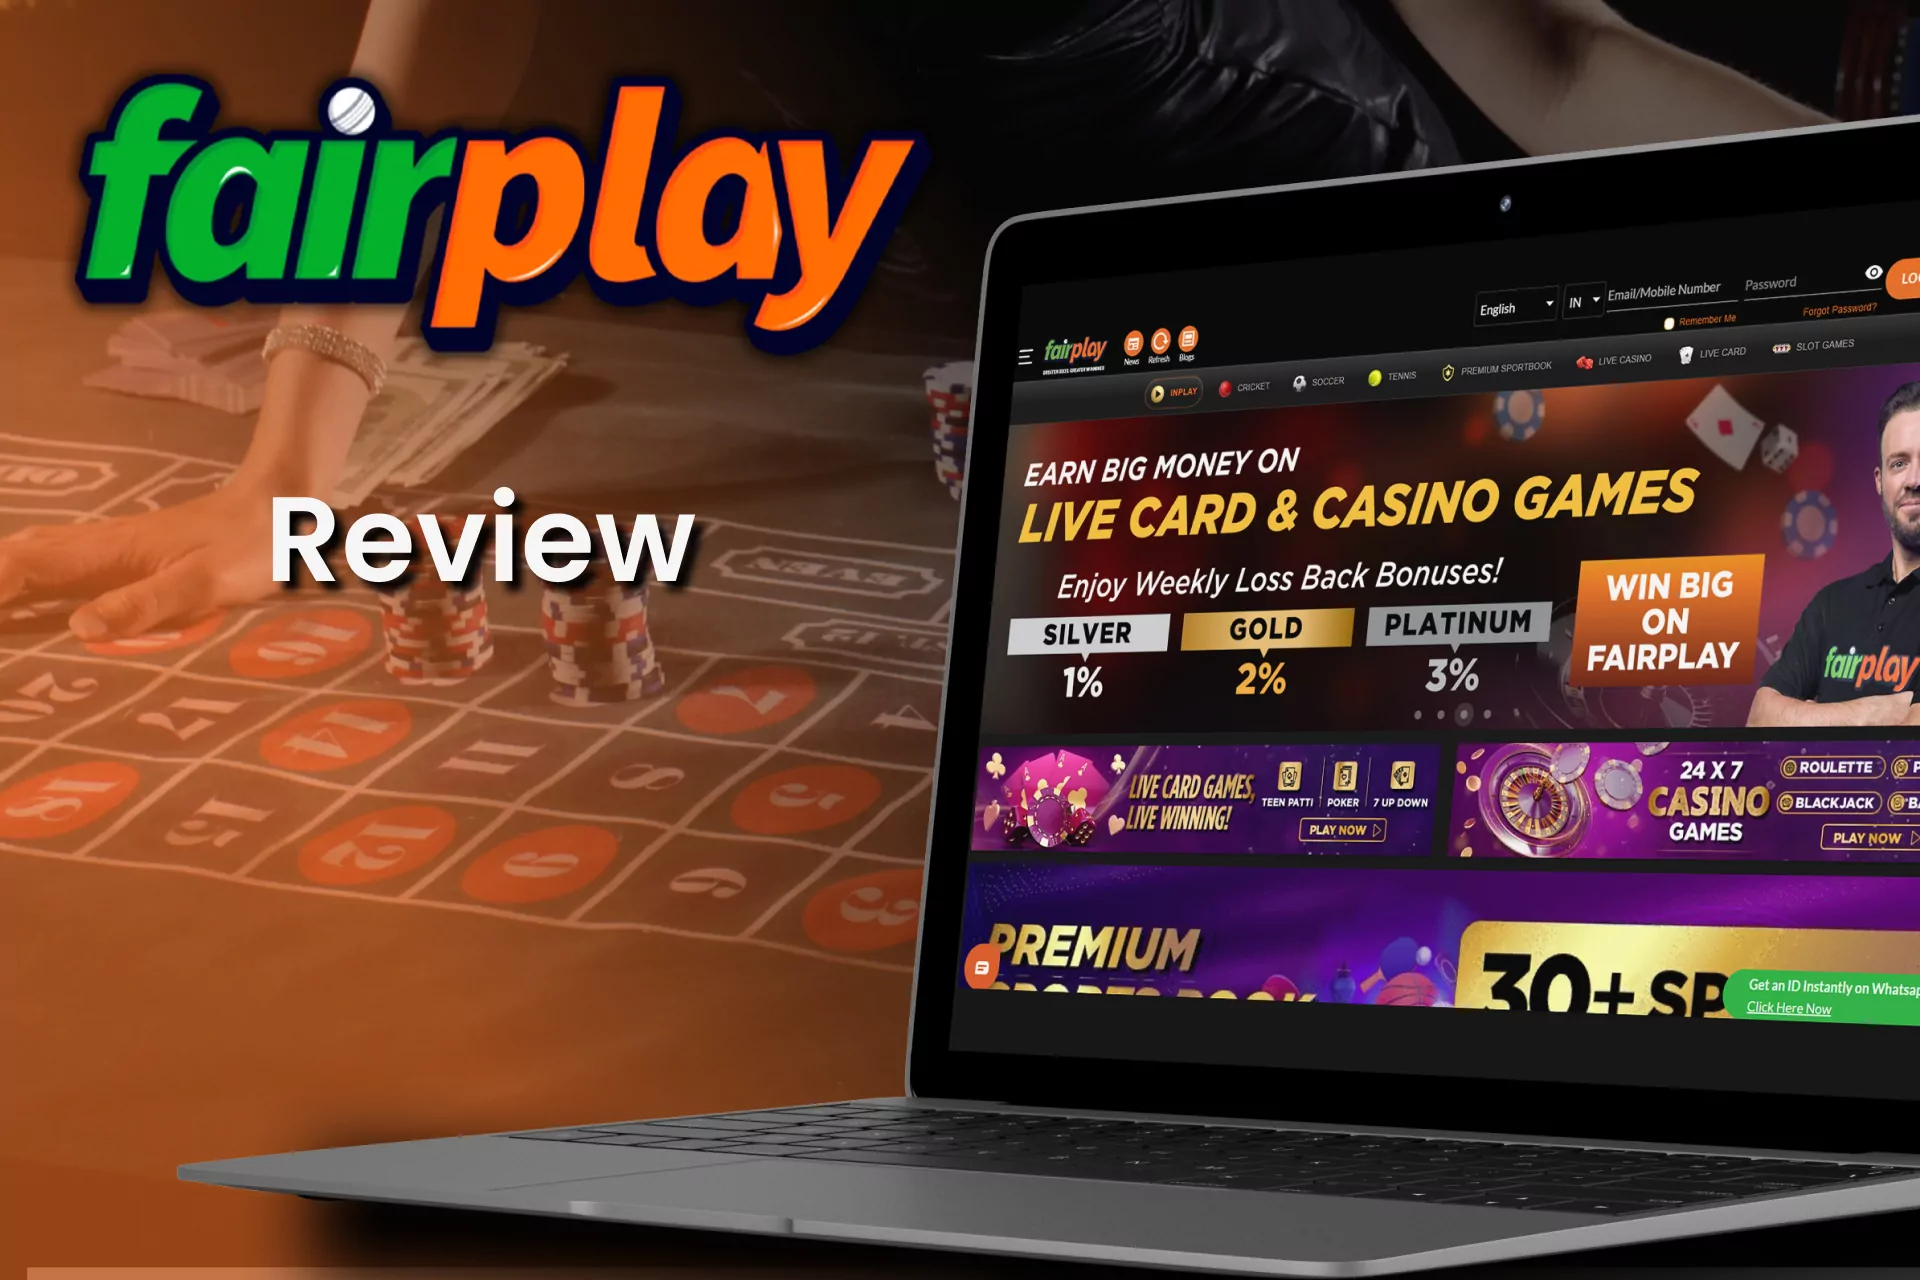 For casino games choose Fairplay.